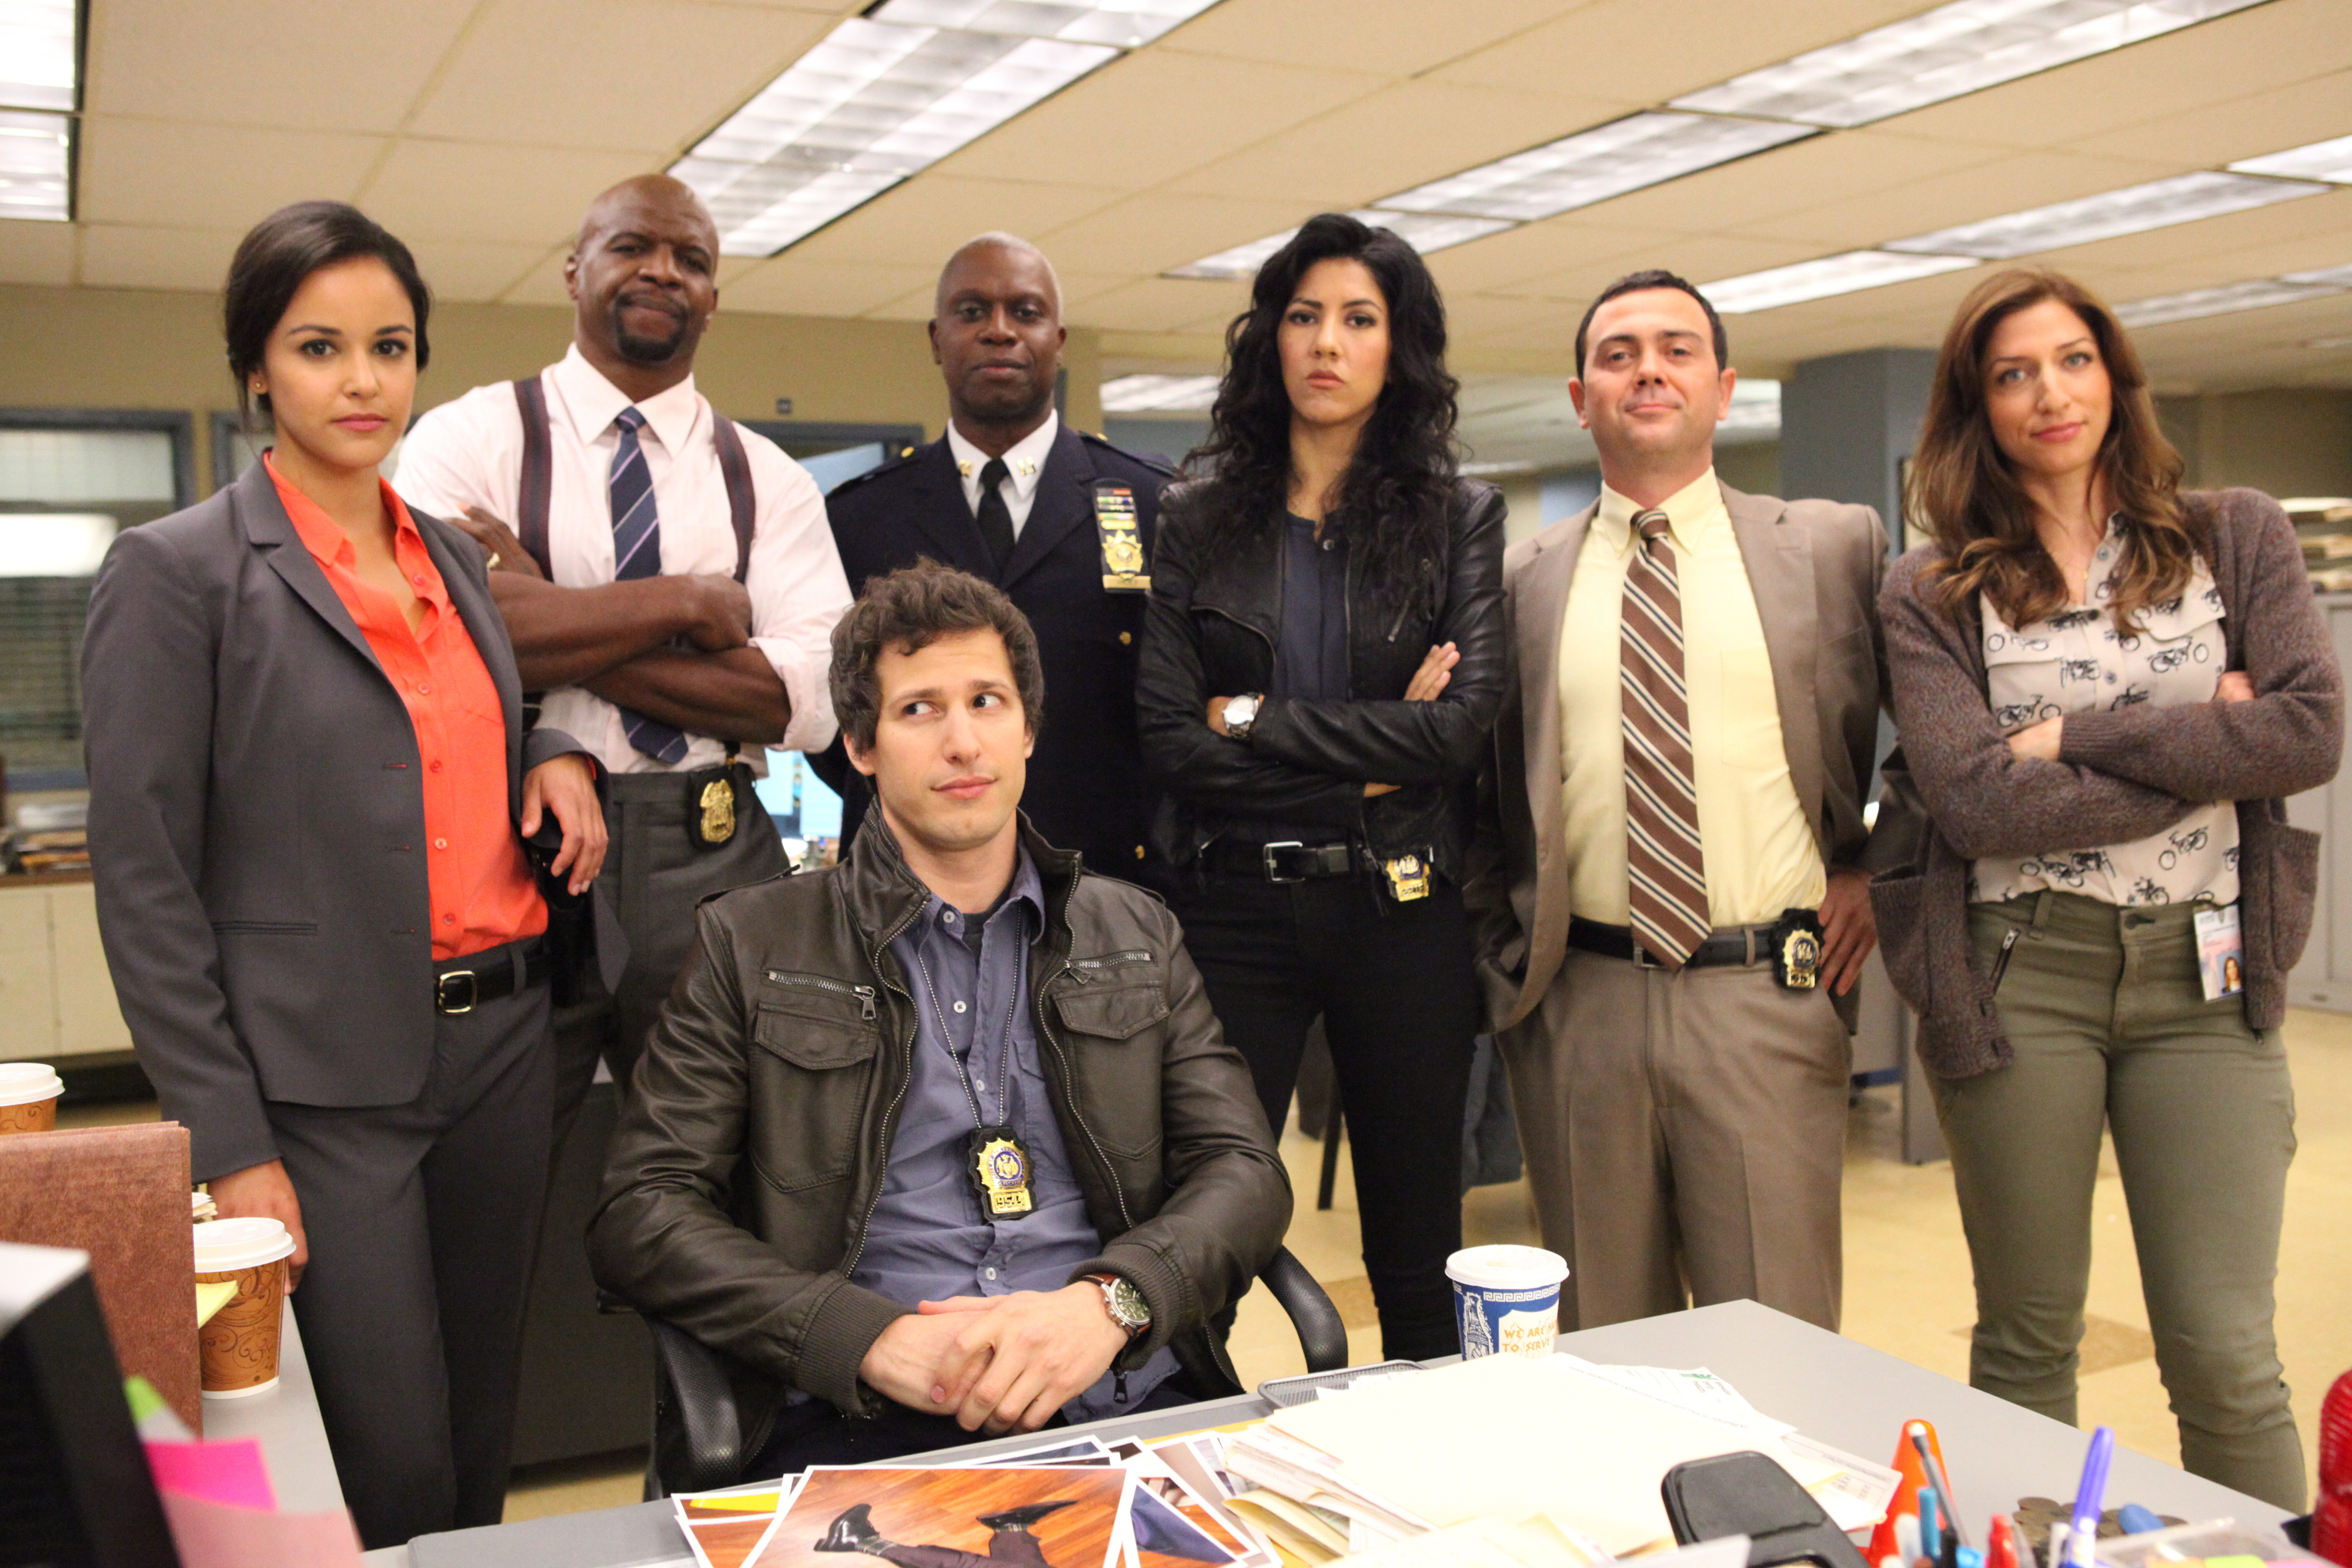 Cast of Brooklyn Nine-Nine posing at a precinct desk: Amy in a suit, Terry in a dress shirt, Holt in a suit, Rosa in leather jacket, Boyle in a tie, and Diaz in a jacket